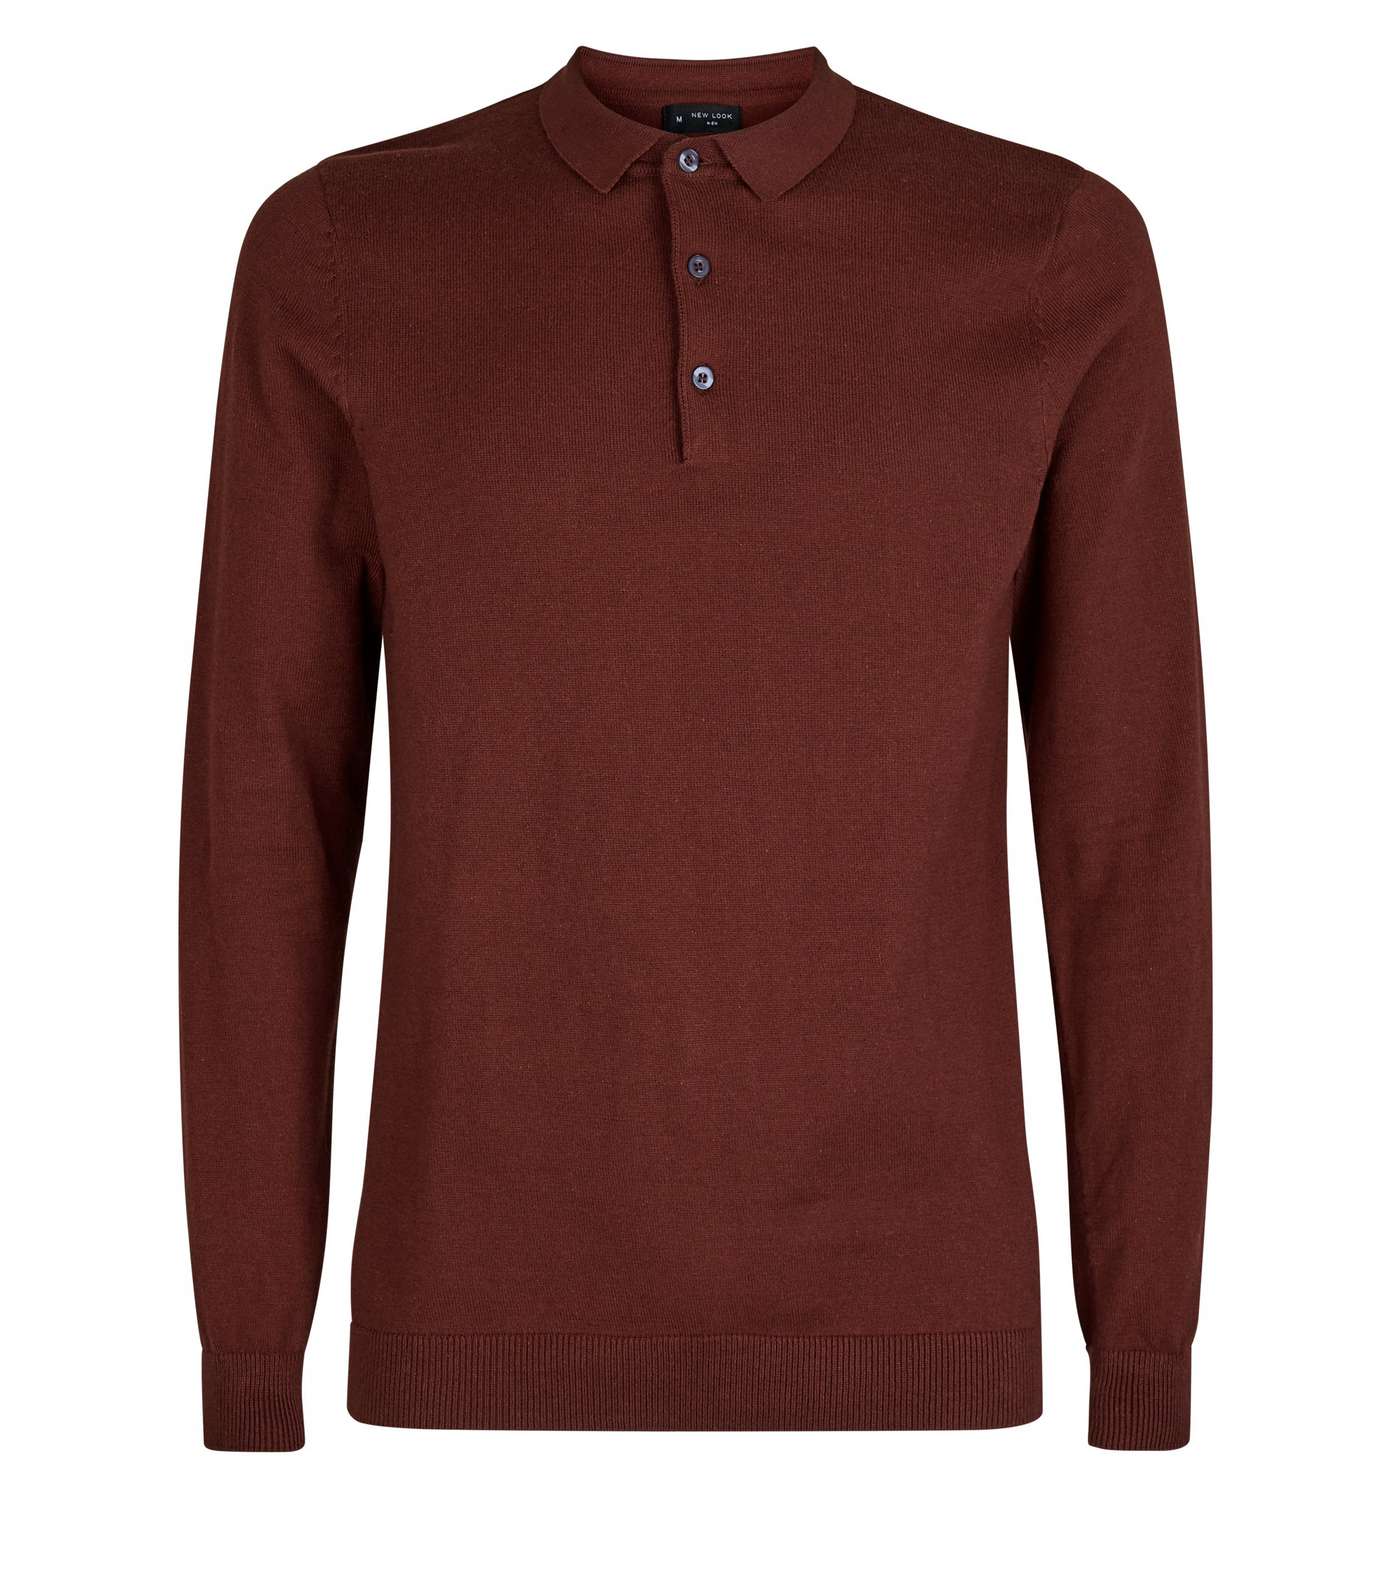 Burgundy Muscle Fit Long Sleeve Knit Polo Shirt Image 4